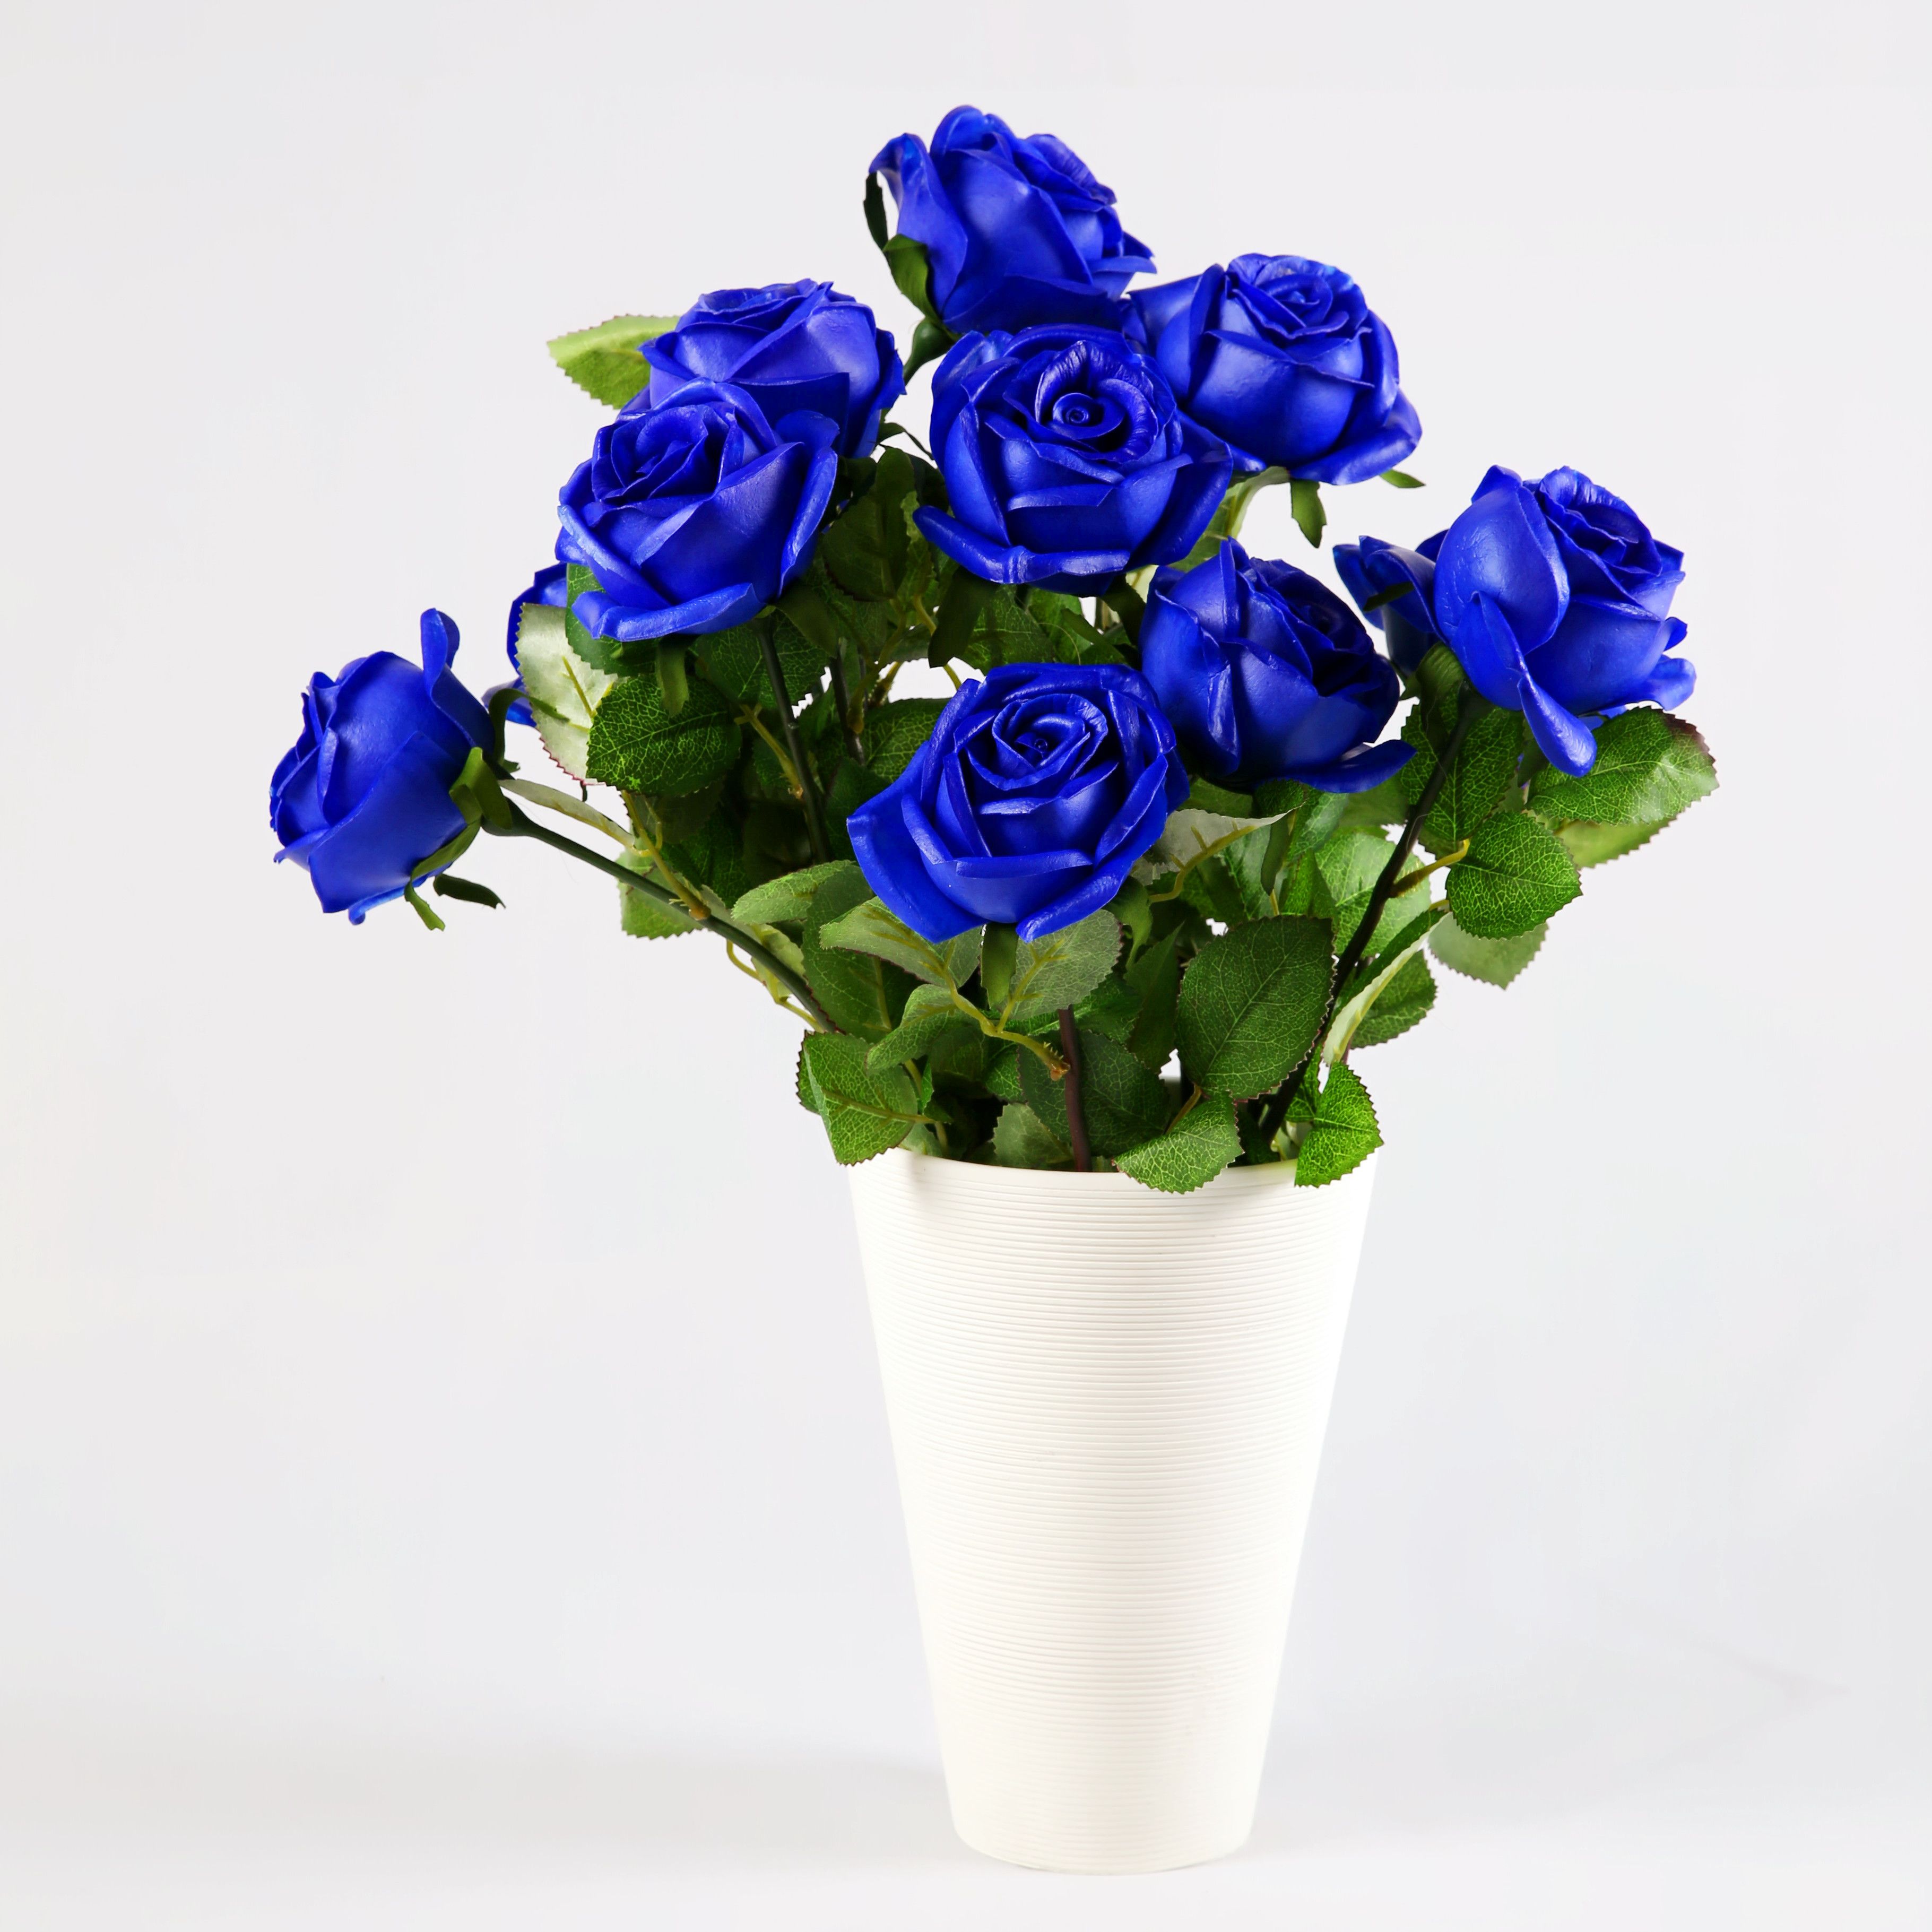 Real Blue Roses For Sale